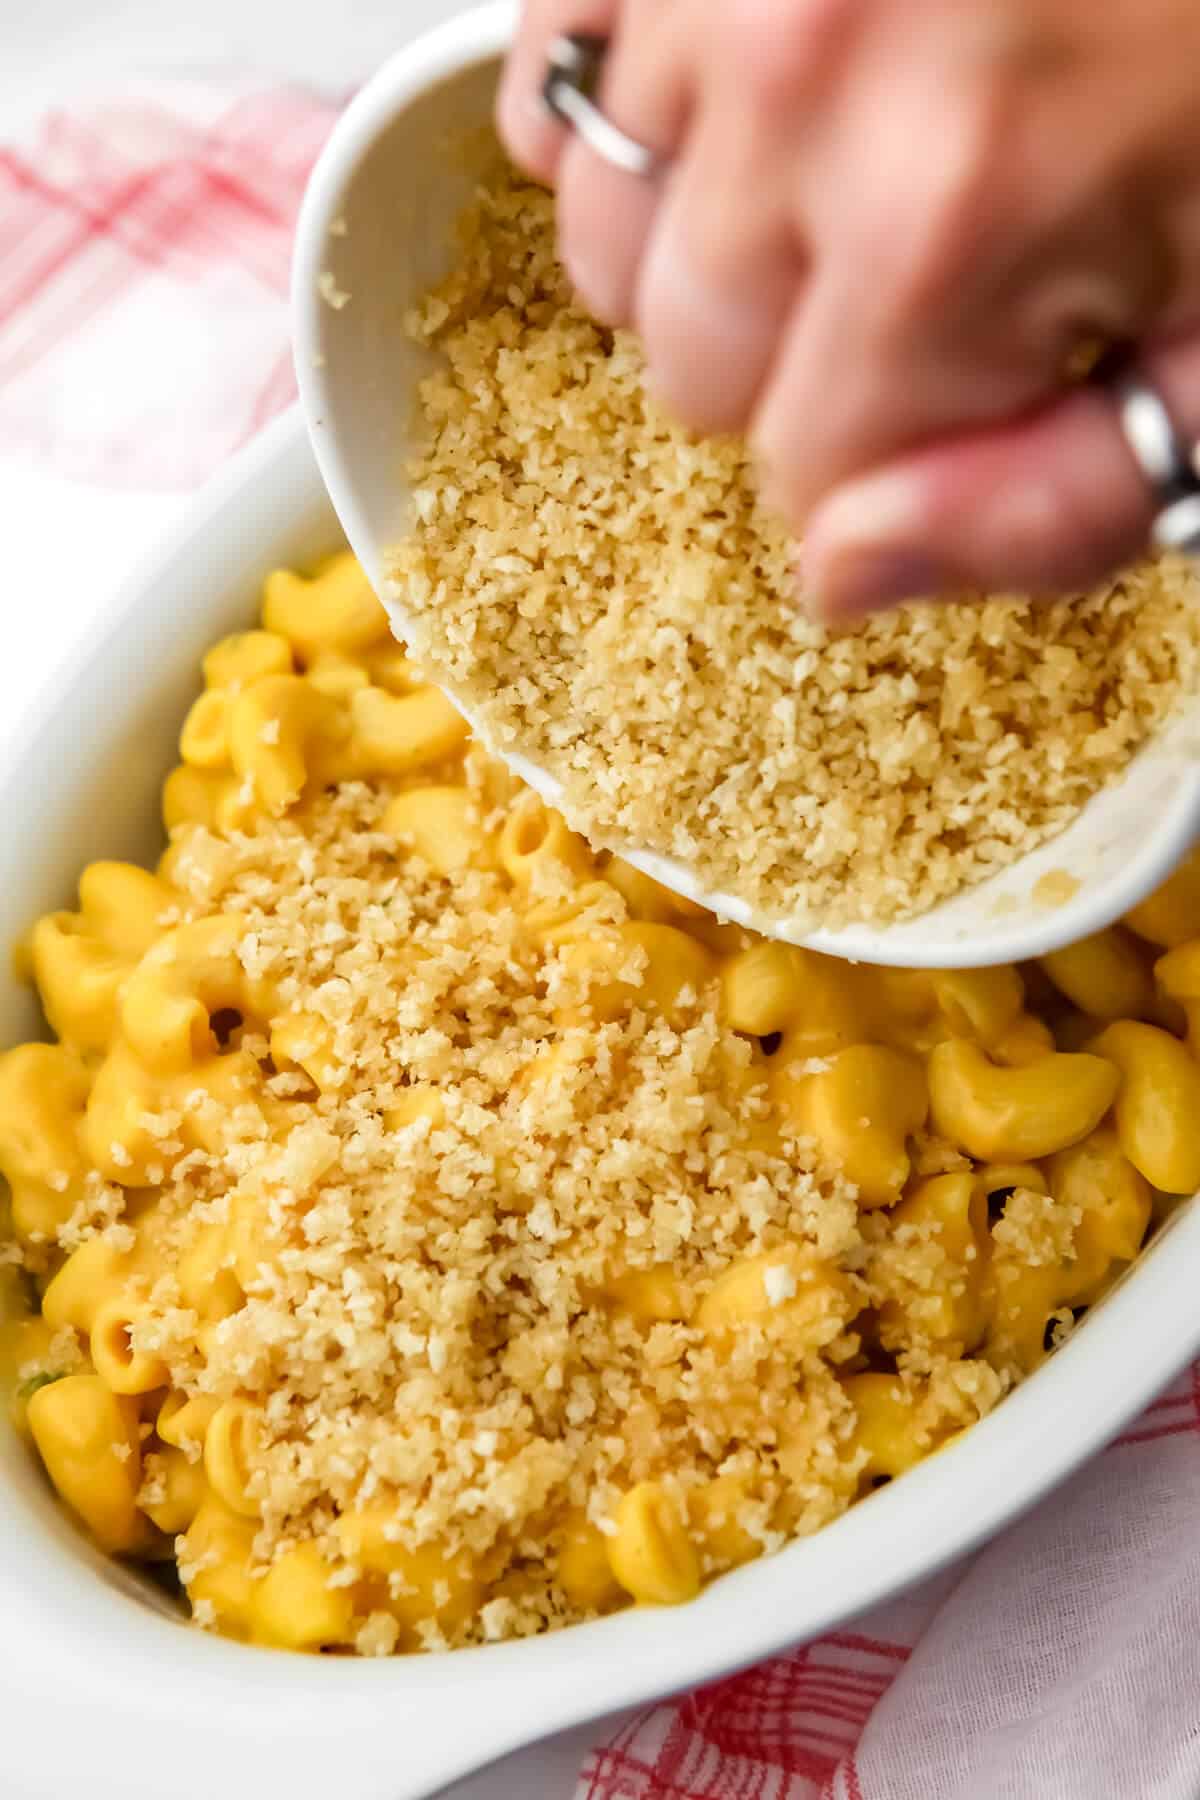 Sprinkling a breadcrumb mixture over the top of vegan mac and cheese before baking.